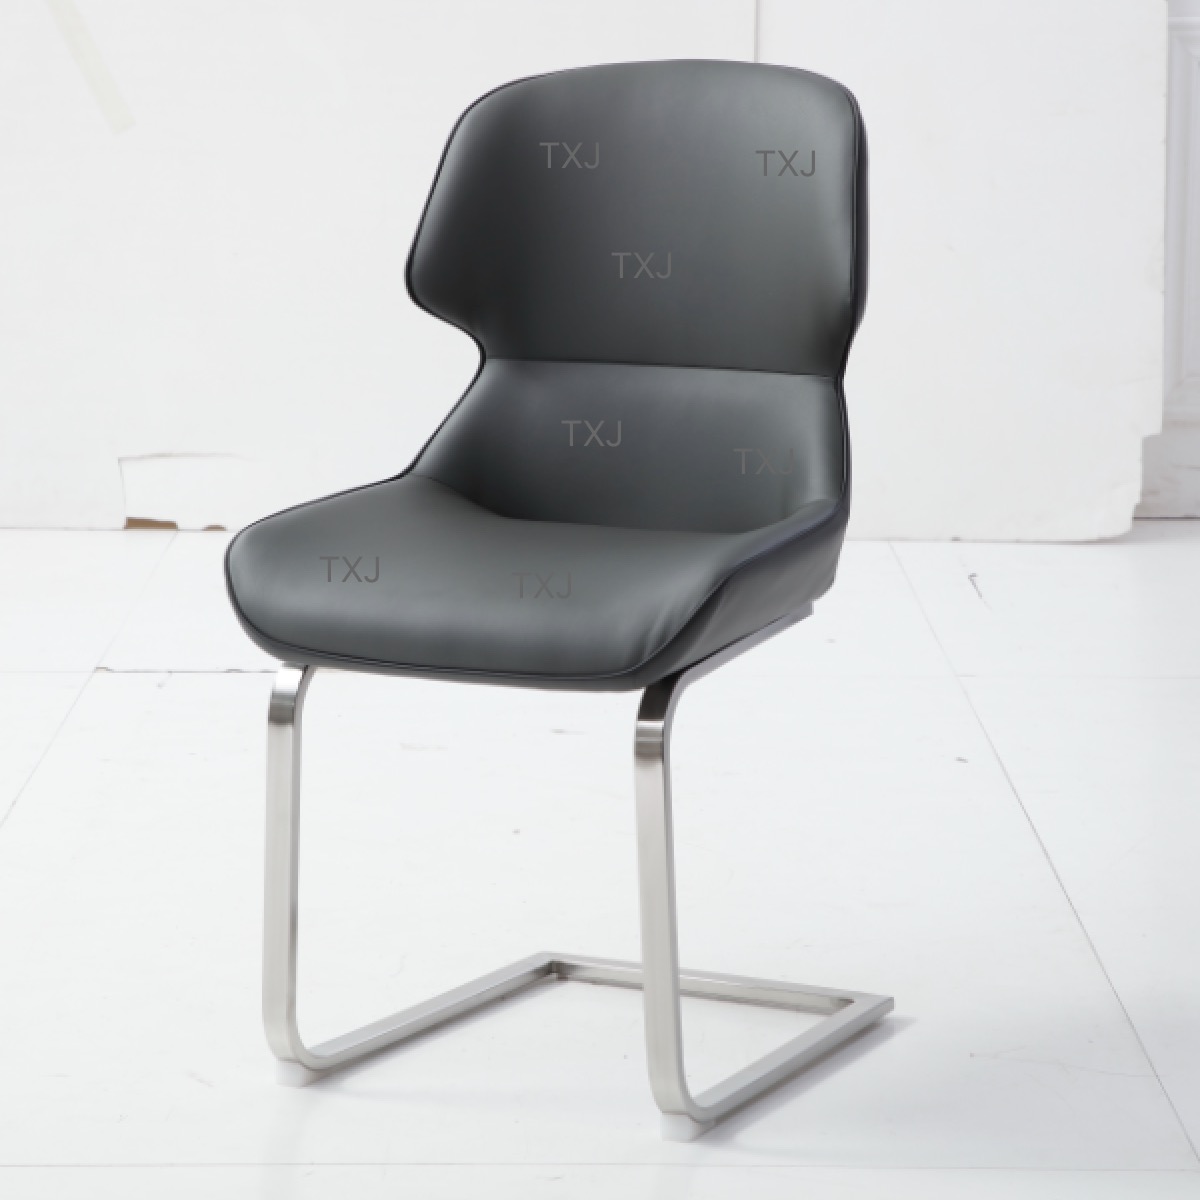 TXJ New Dining Chair Willow with PU and Brushed stainless steel Featured Image